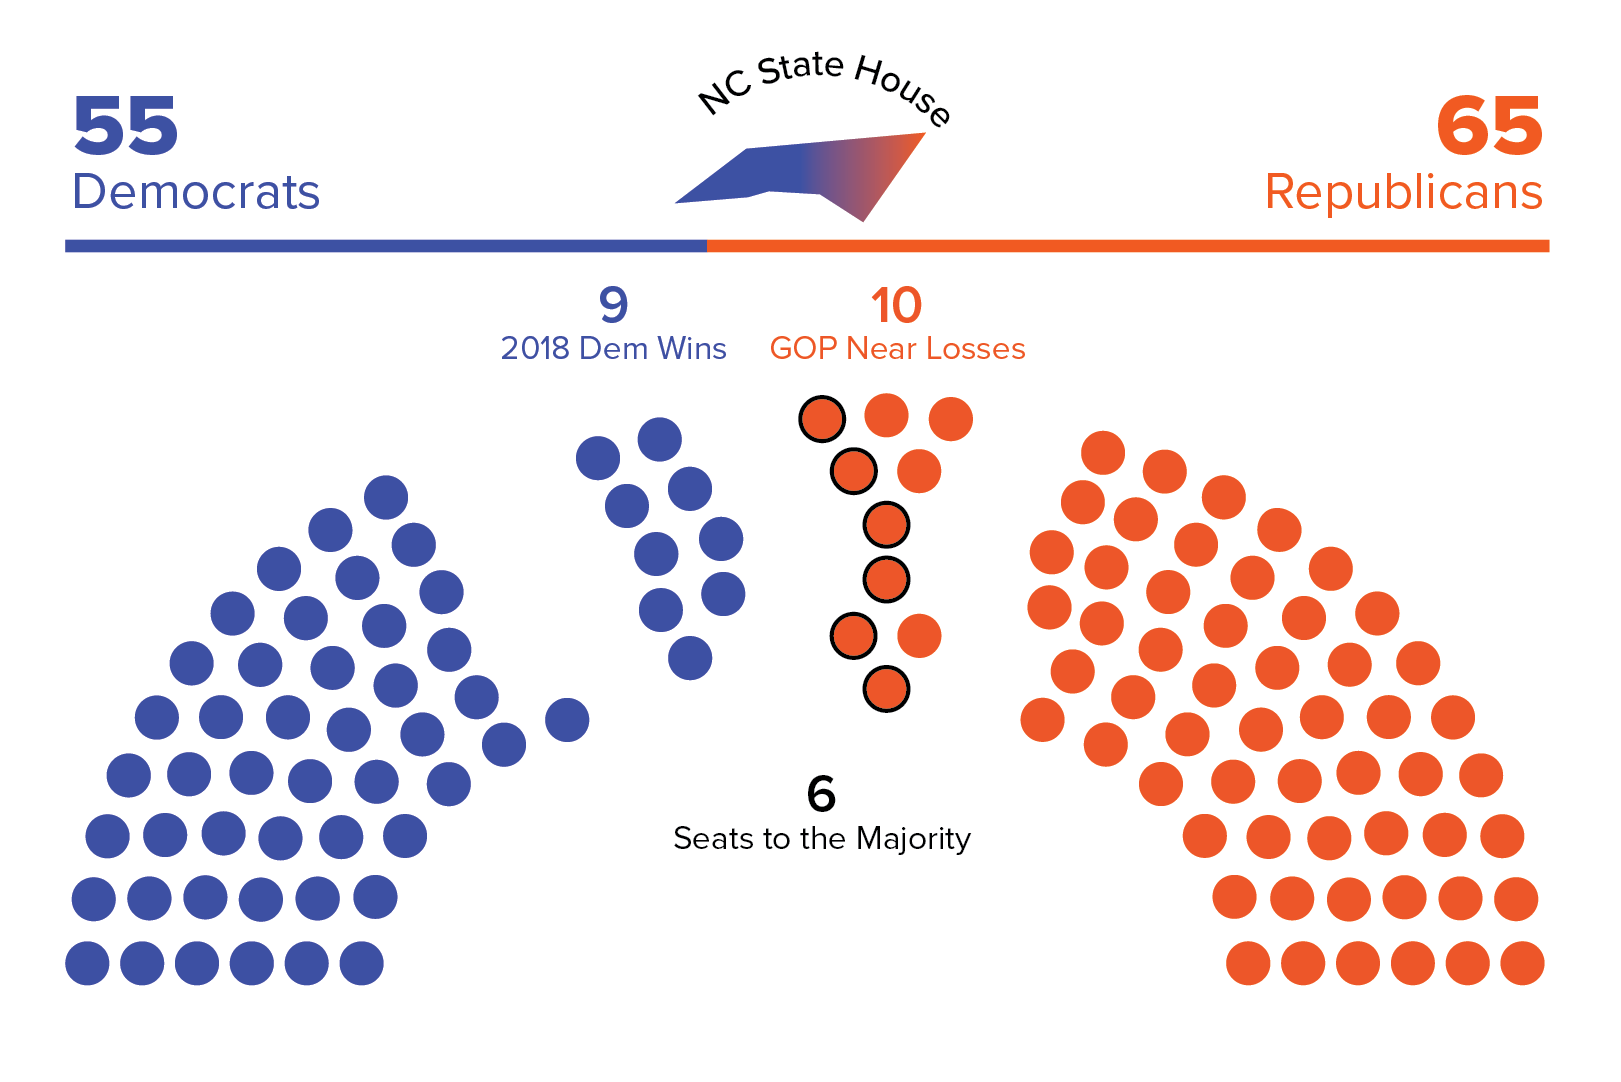 North Carolina House 2018 Results and Current StandingDemocrats netted 9 seats in 2018 and garnered greater than 45% in 10 additional districts under the old maps; additional districts may be competitive under new maps.